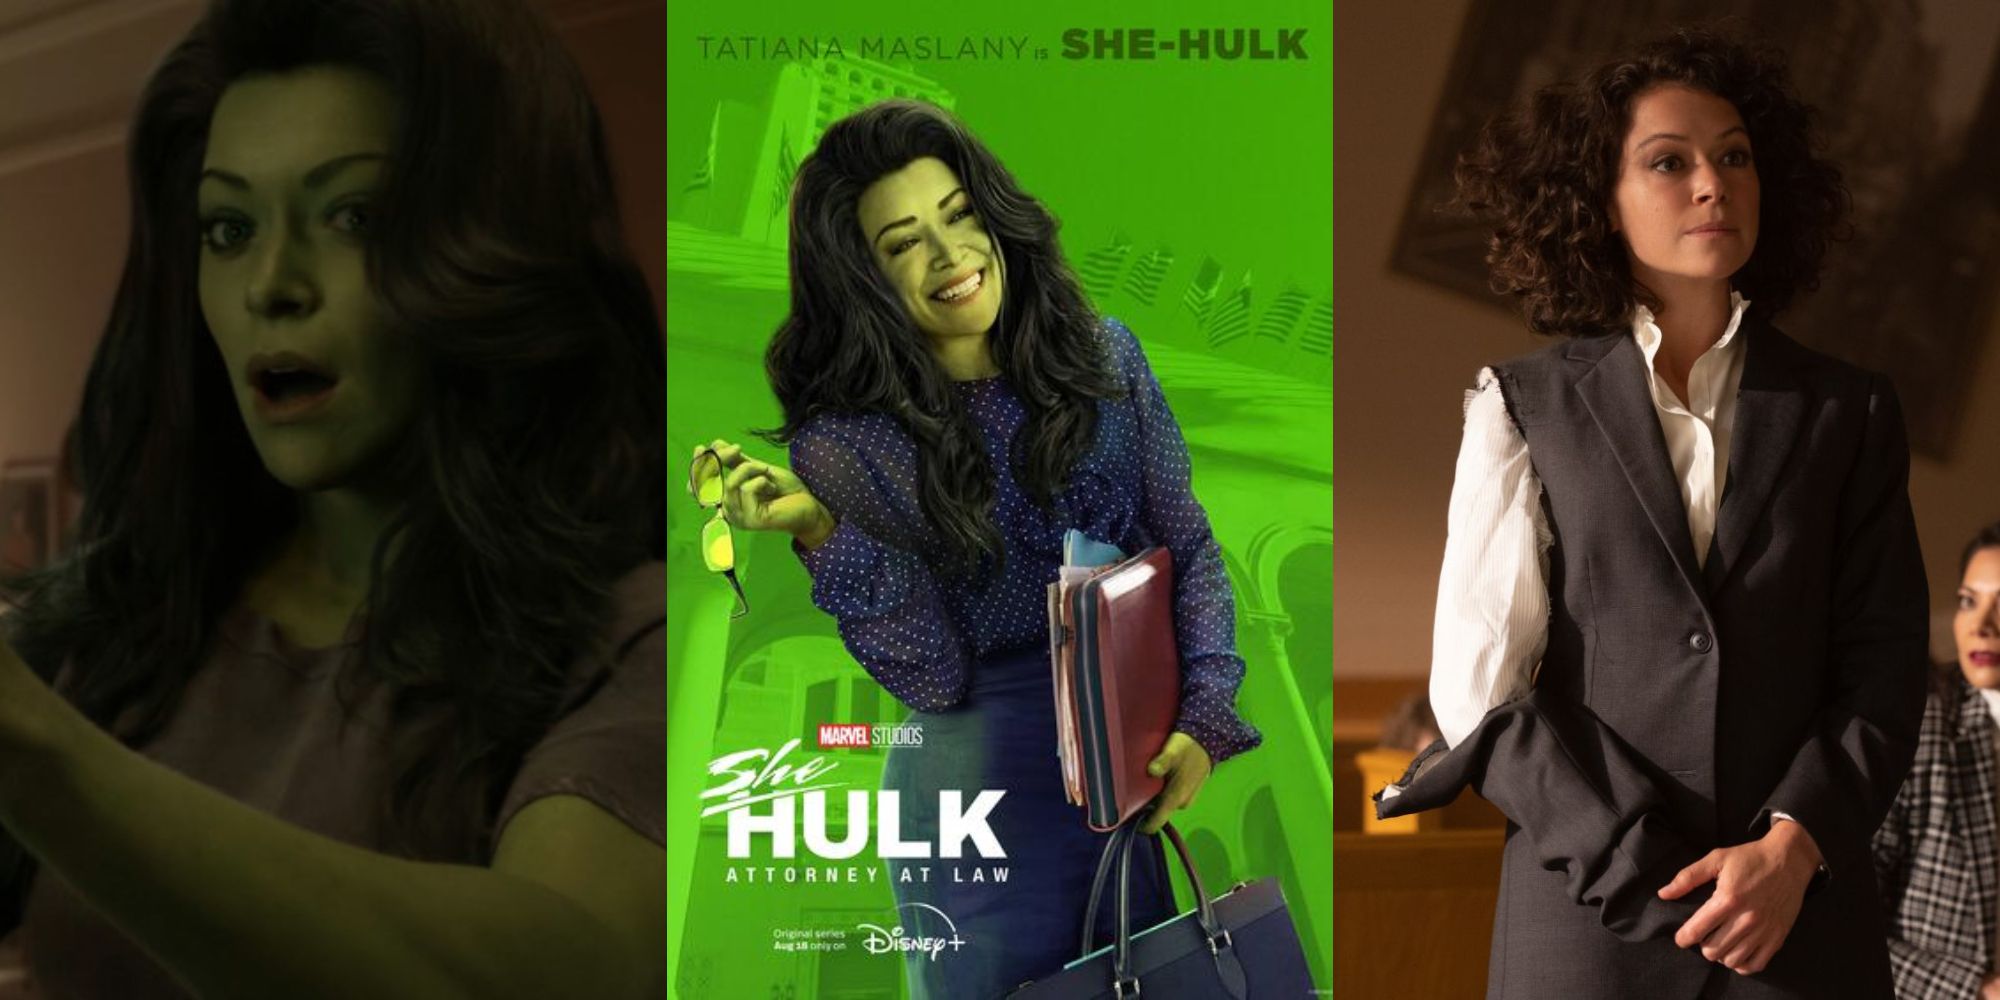 Two stills from She-Hulk and a poster for the show.